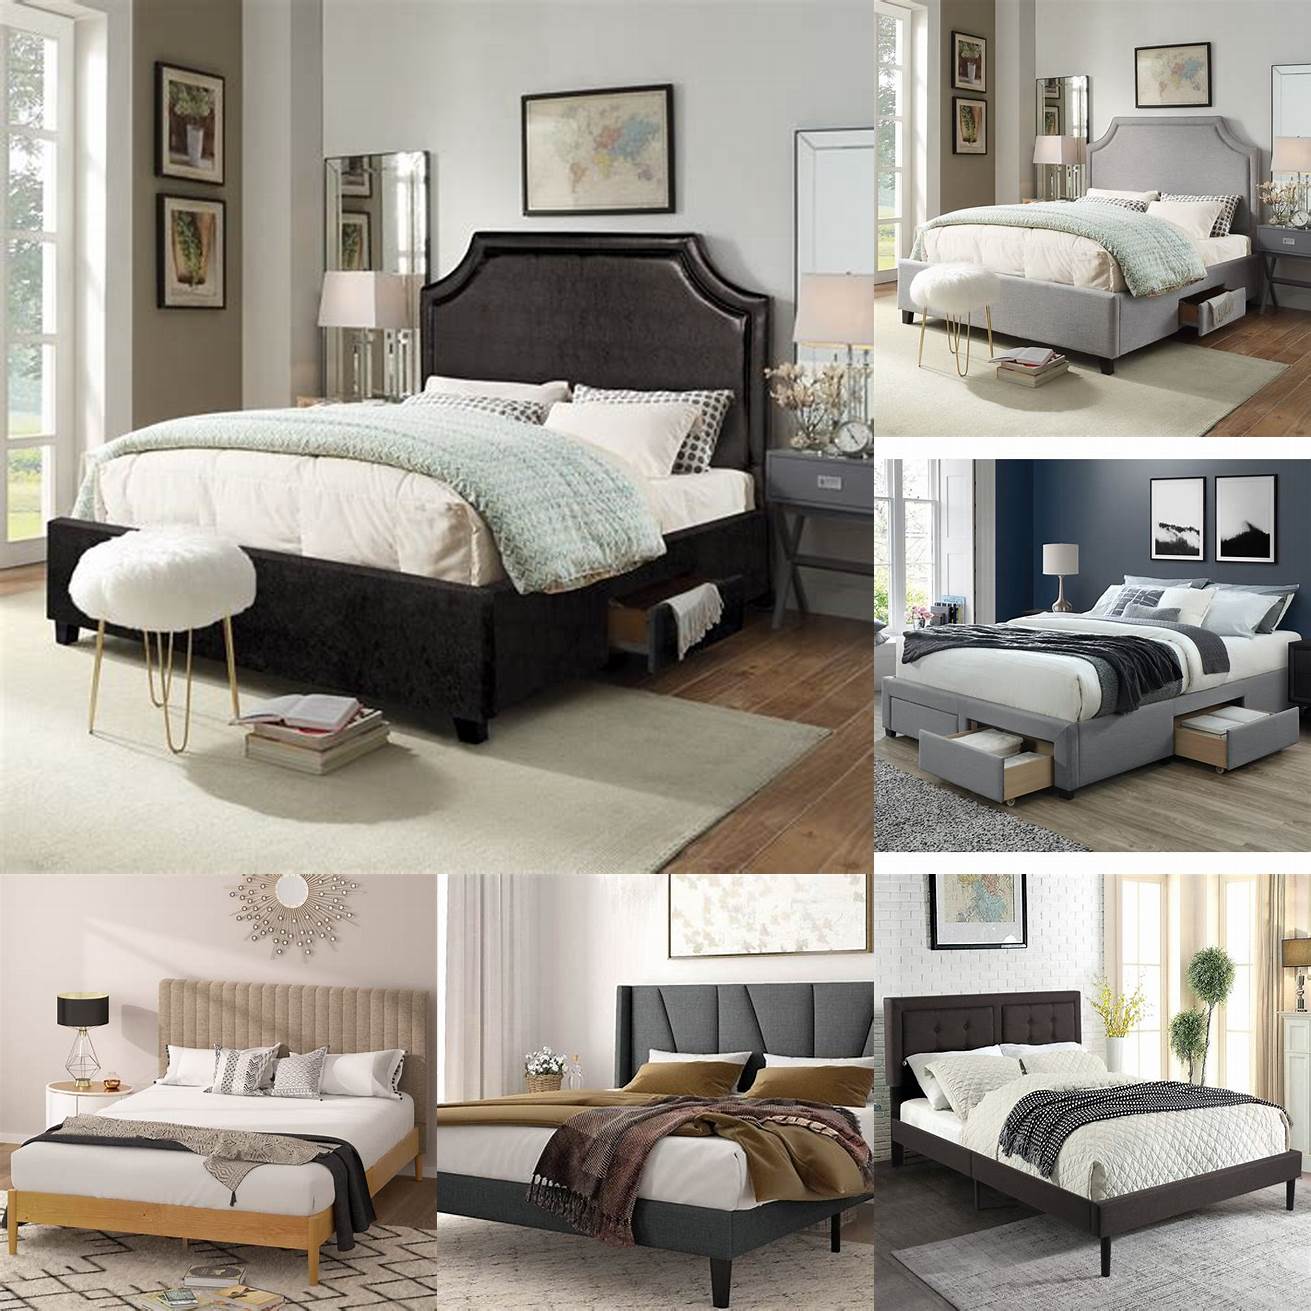 A platform bed frame with an upholstered headboard